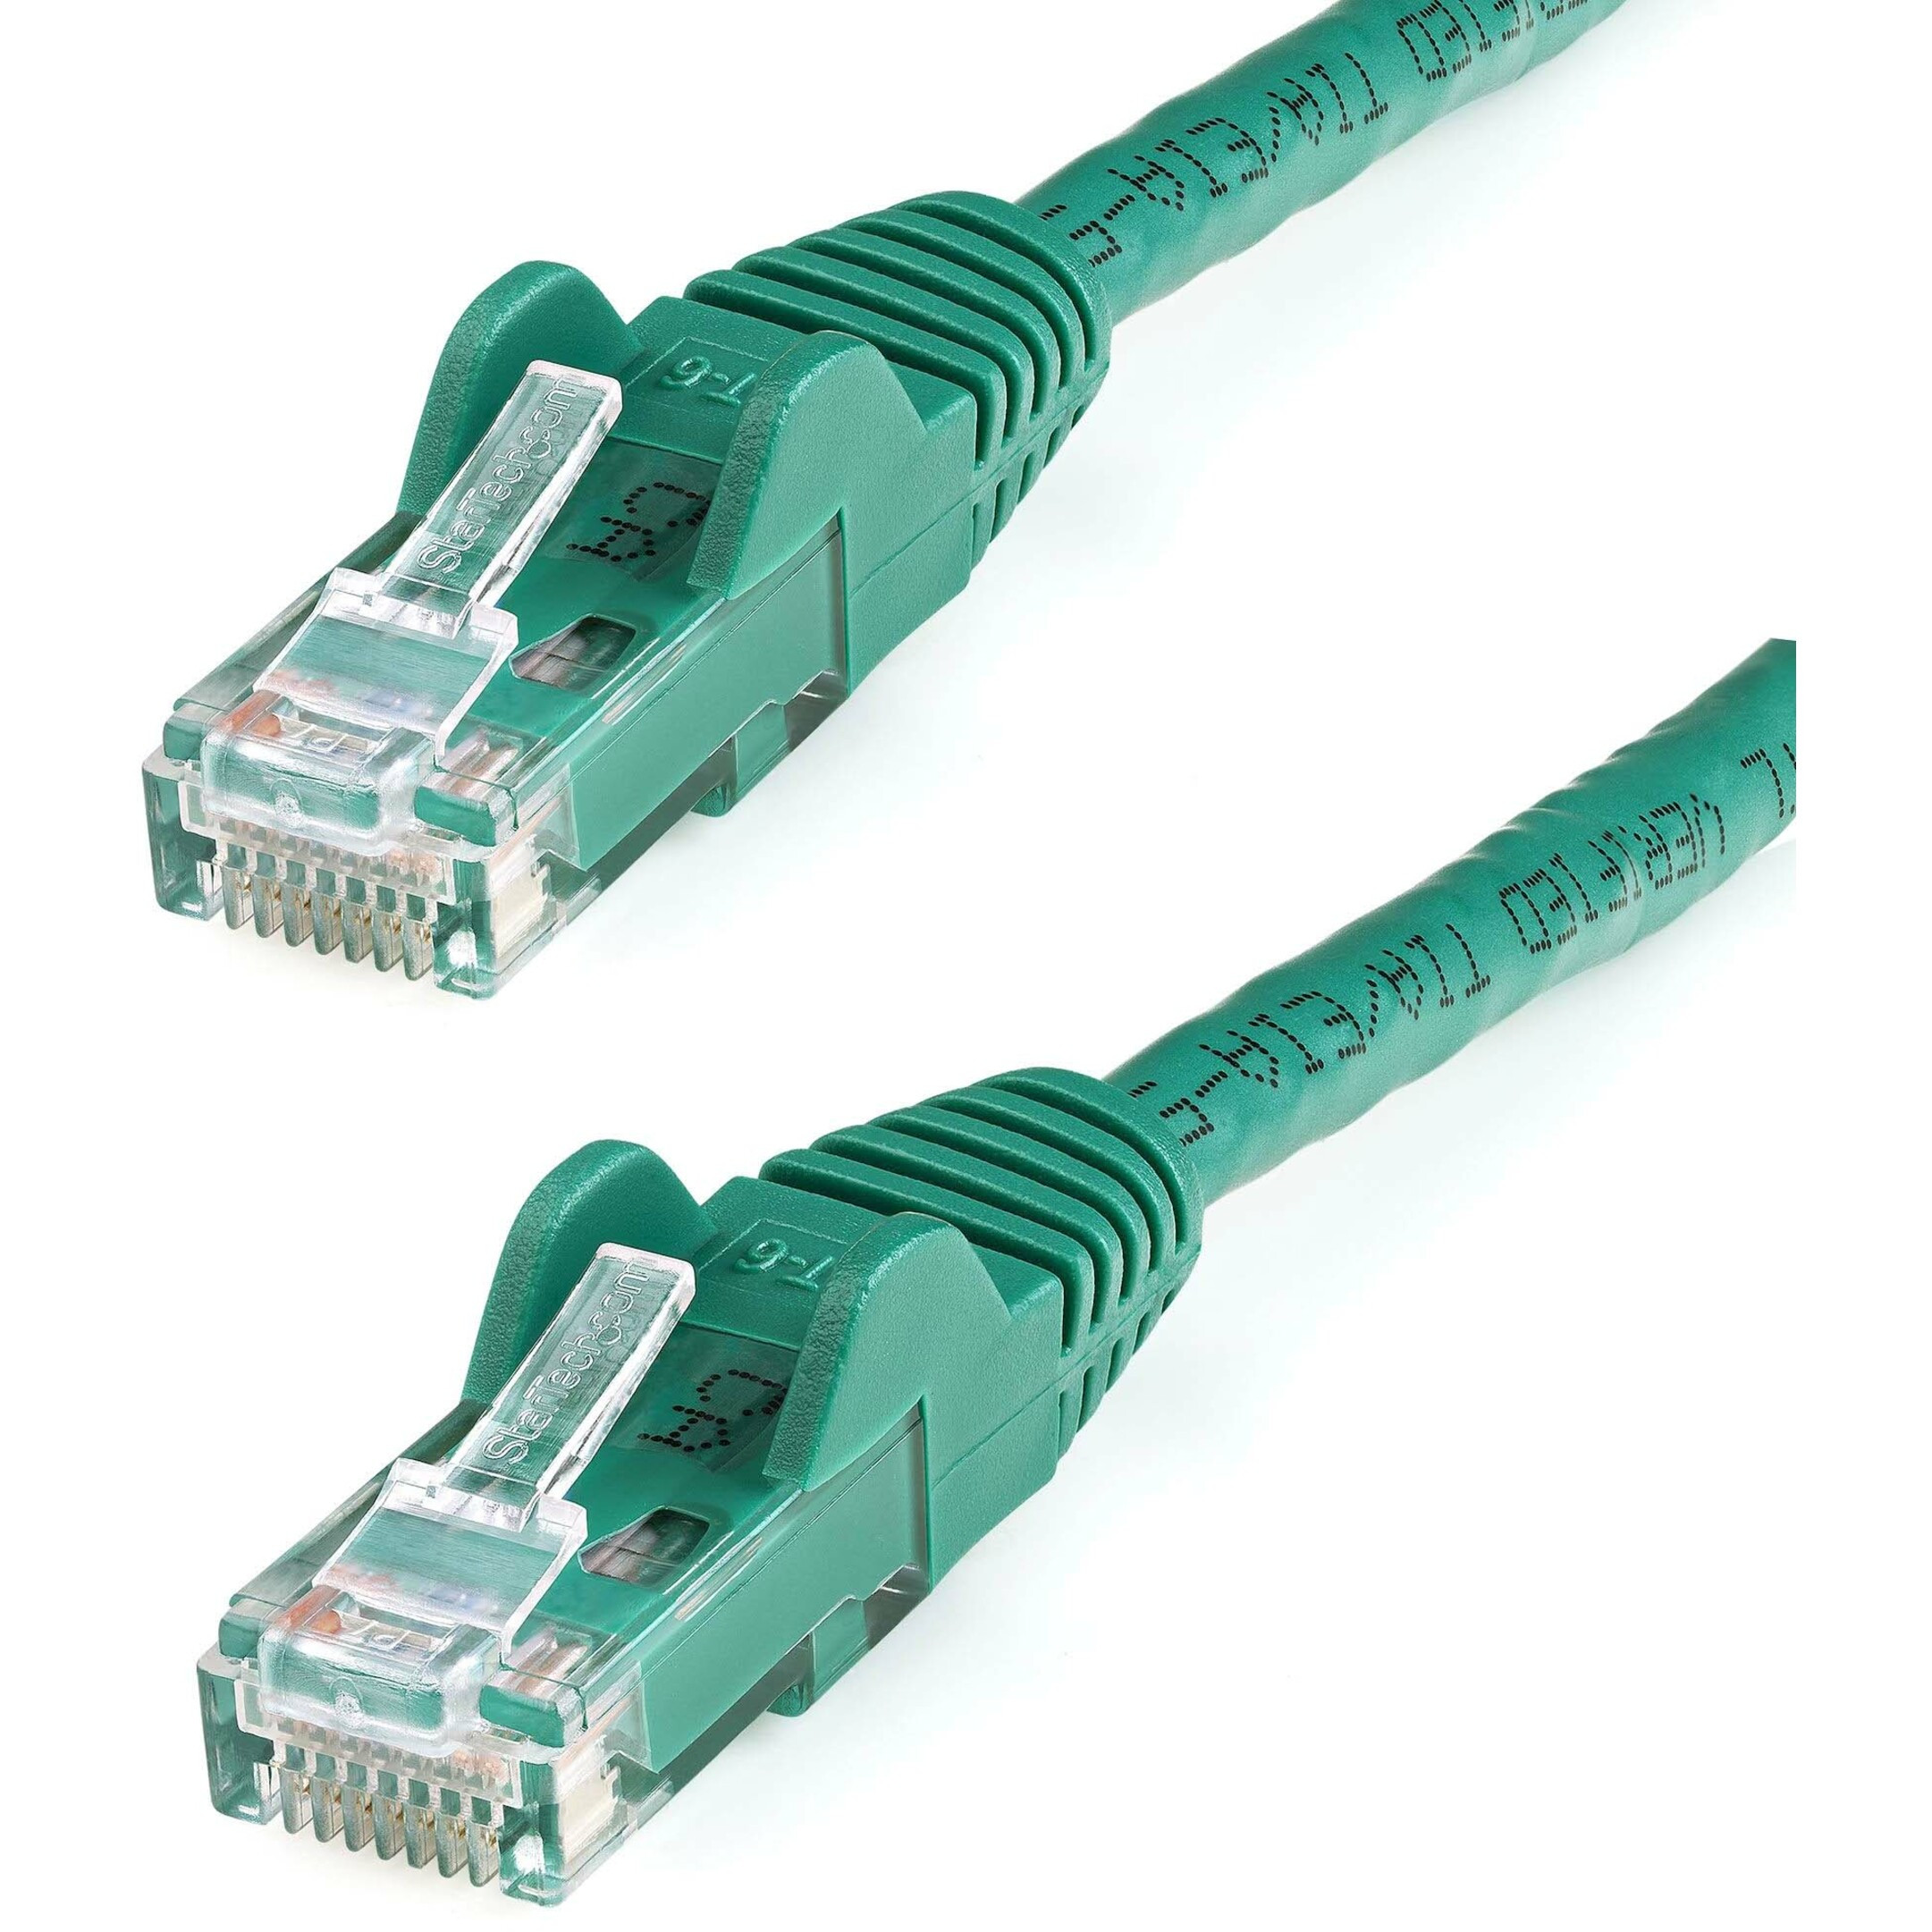 Startech .com 4ft CAT6 Ethernet CableGreen Snagless Gigabit100W PoE UTP 650MHz Category 6 Patch Cord UL Certified Wiring/TIA4ft Green… N6PATCH4GN